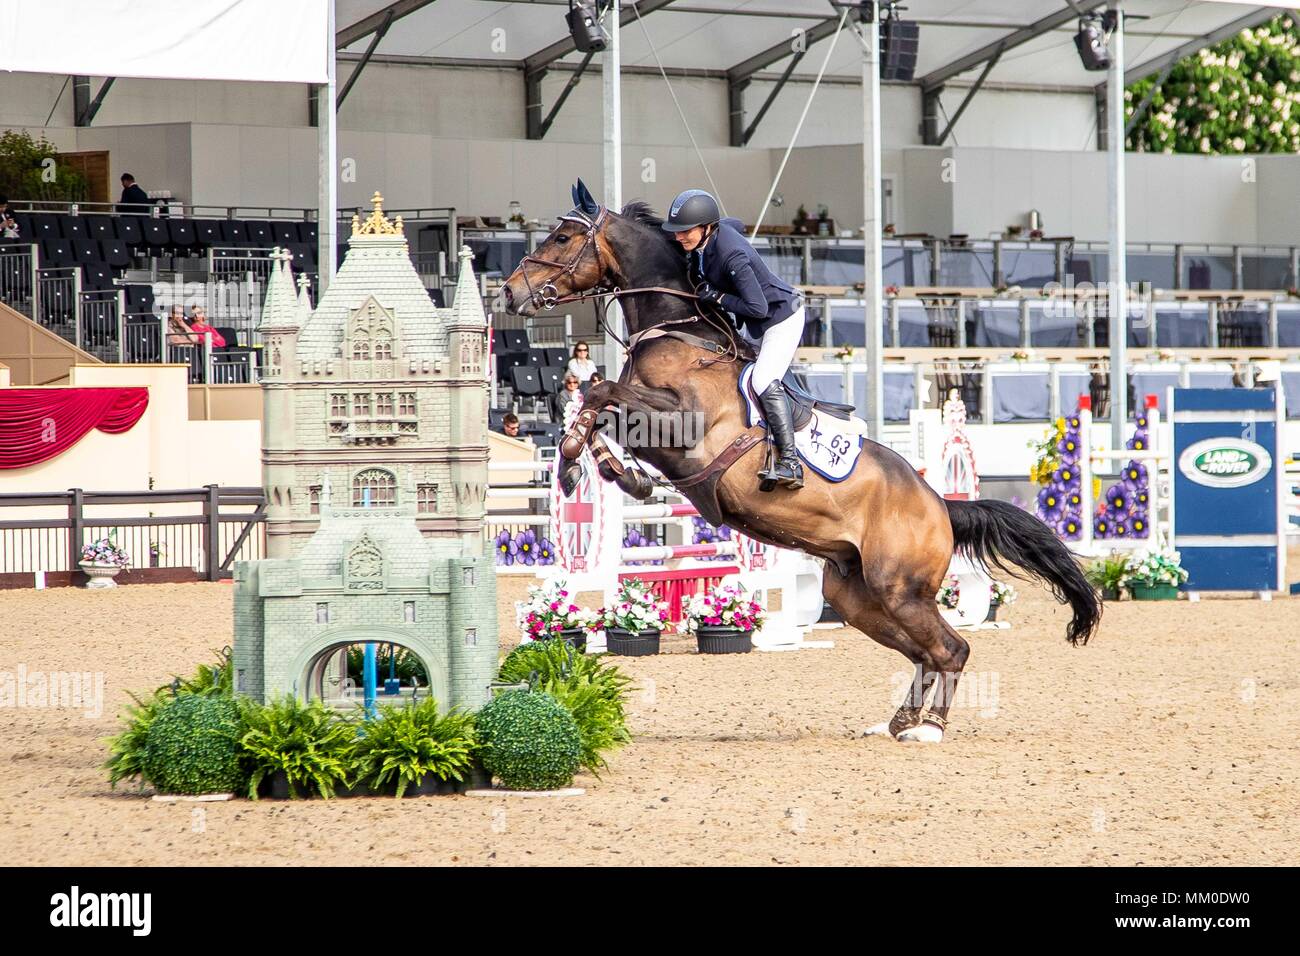 Windsor, Berkshire, UK. 9th May 2018. Windsor, Berkshire, UK. Day 1. Royal Windsor Hose Show. Windsor. Berkshire. UK. Showjumpimg. B&C Handicap. Sian Edwards riding Troo Contest. GBR. Winner.  09/05/2018. Credit: Sport In Pictures/Alamy Live News Stock Photo